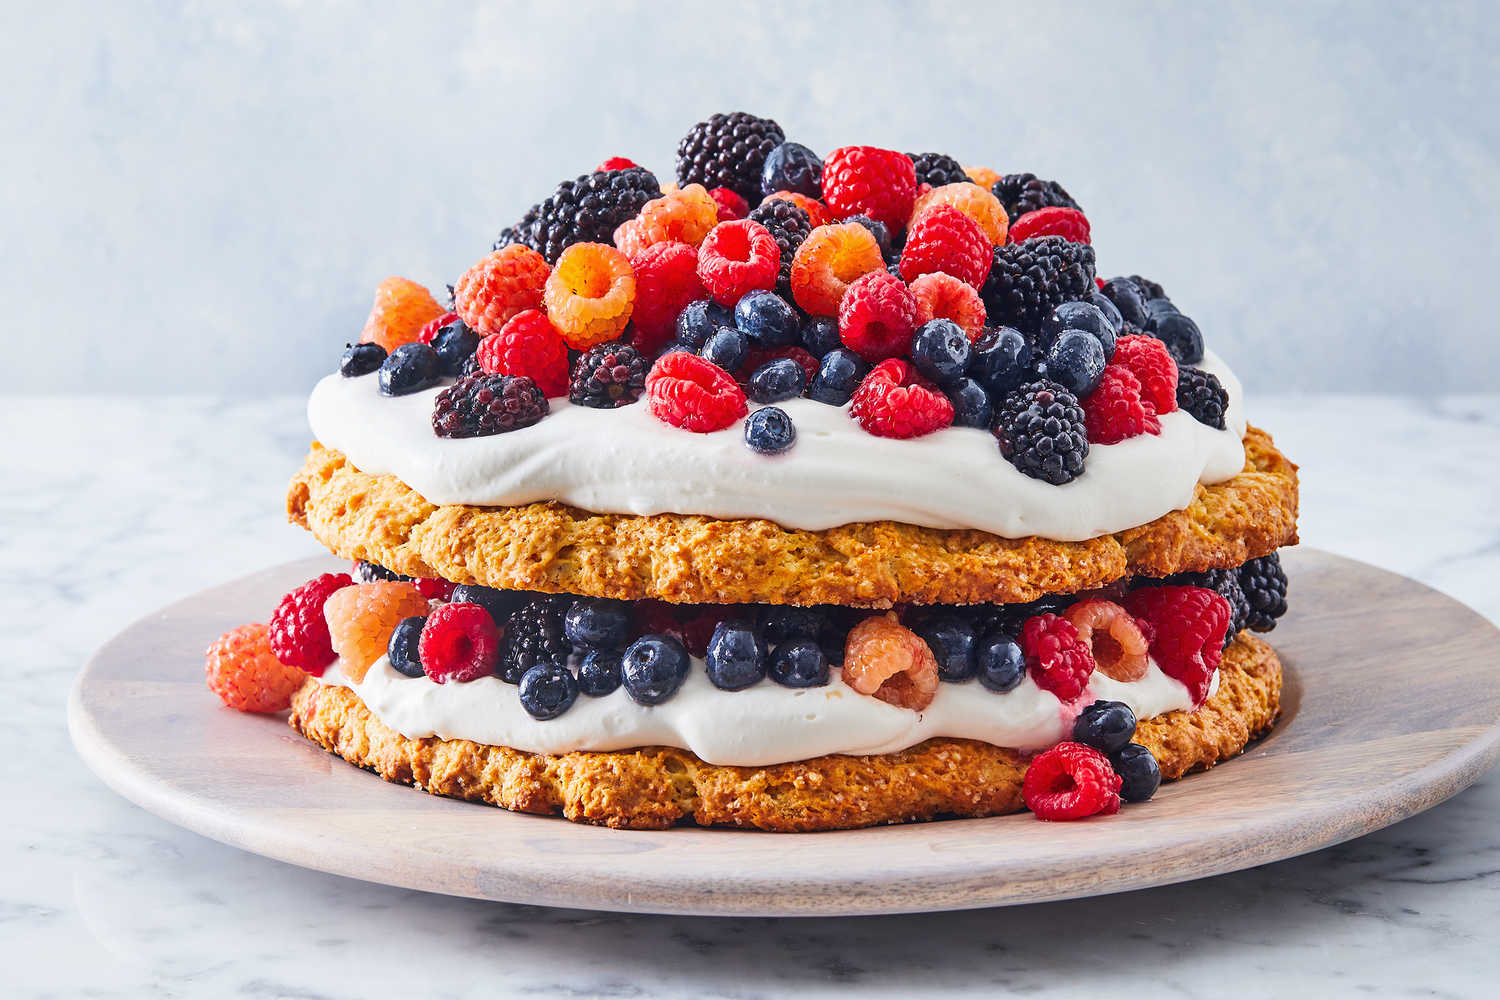 What is a Summer Berry Cake?